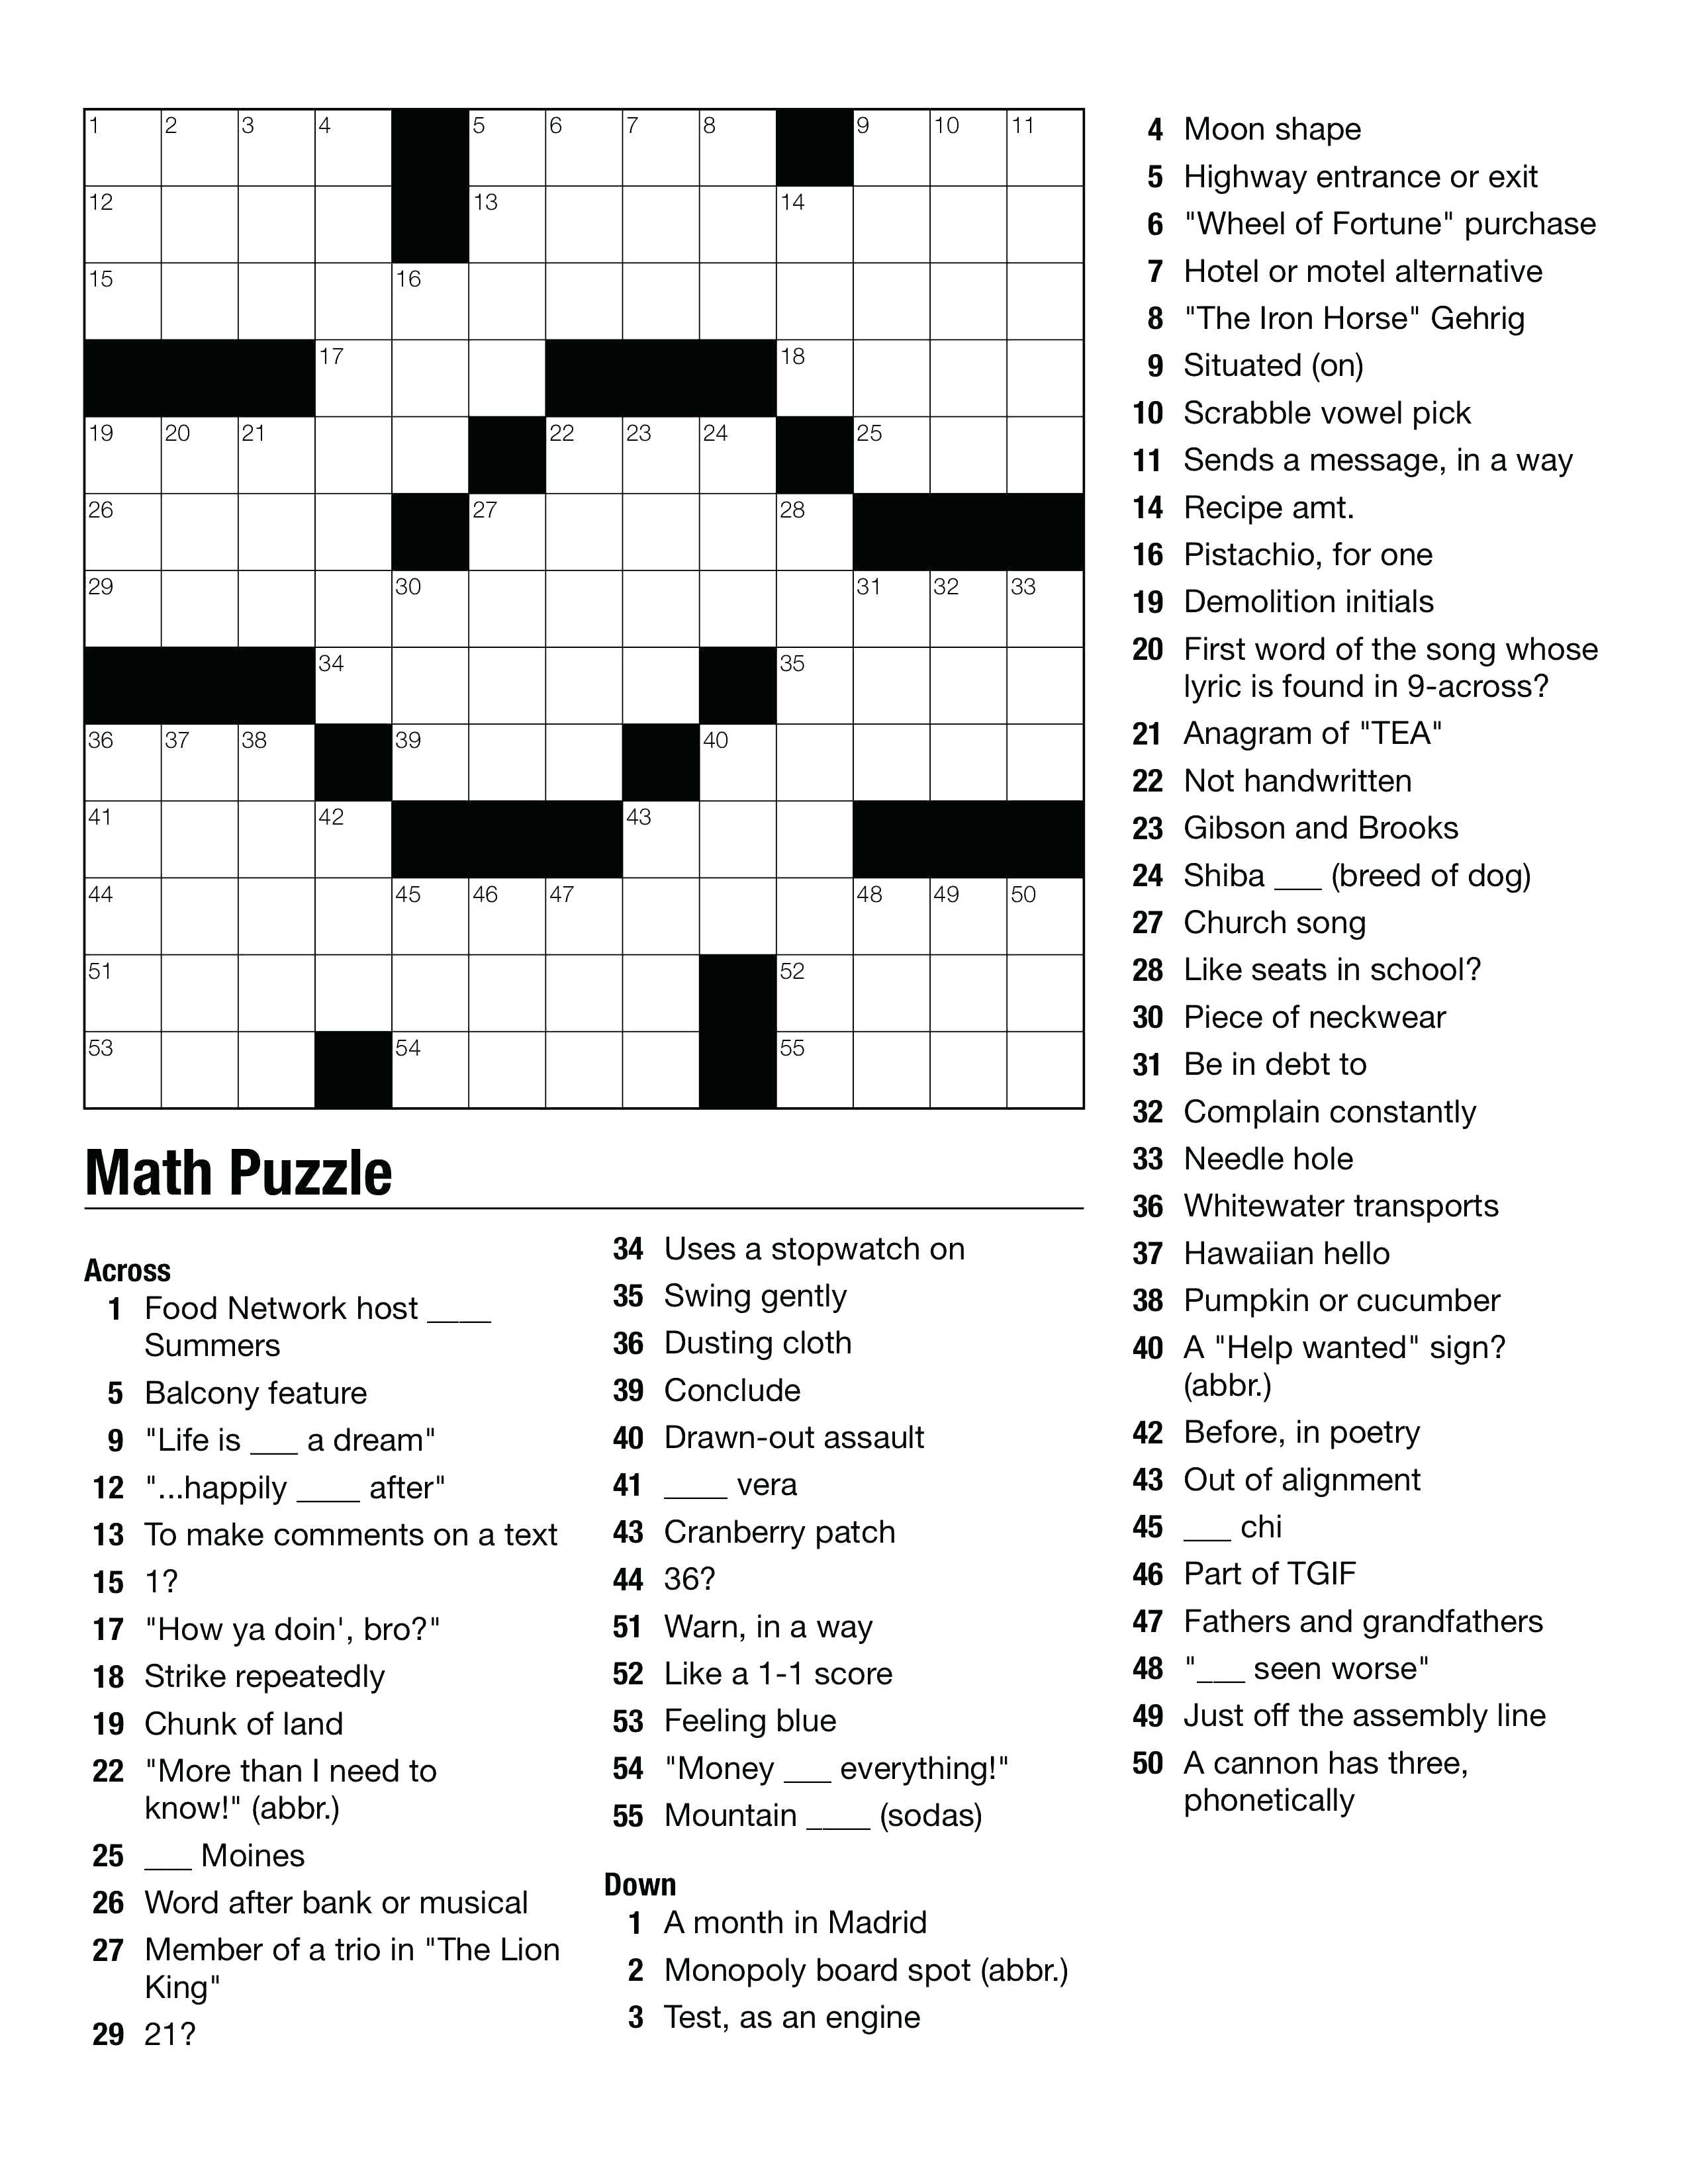 Geometry Puzzles Math Geometry Images Teaching Ideas On Crossword - Winter Crossword Puzzle Printable